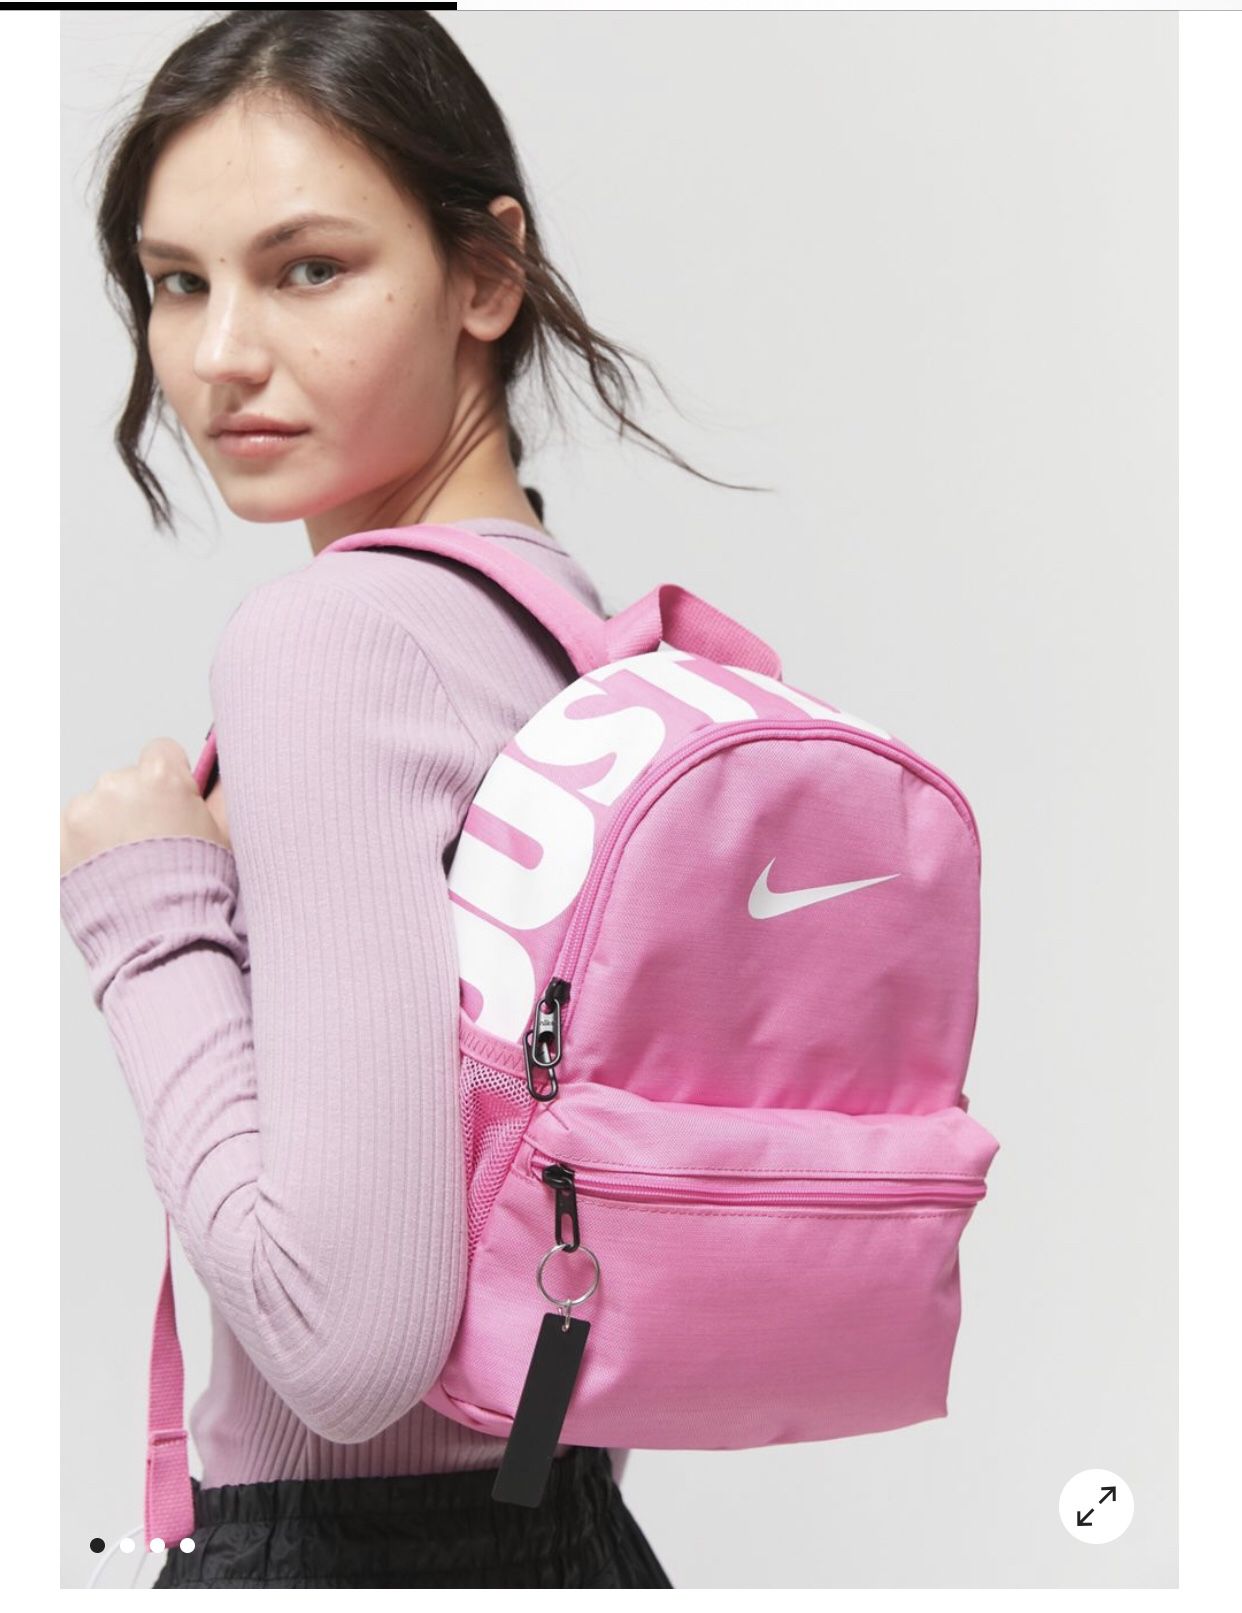 Nike mini backpack 🎒 so cute & Convenient! To take hiking or just to show off🥳💕👍🏼 “just do it “ word written on it